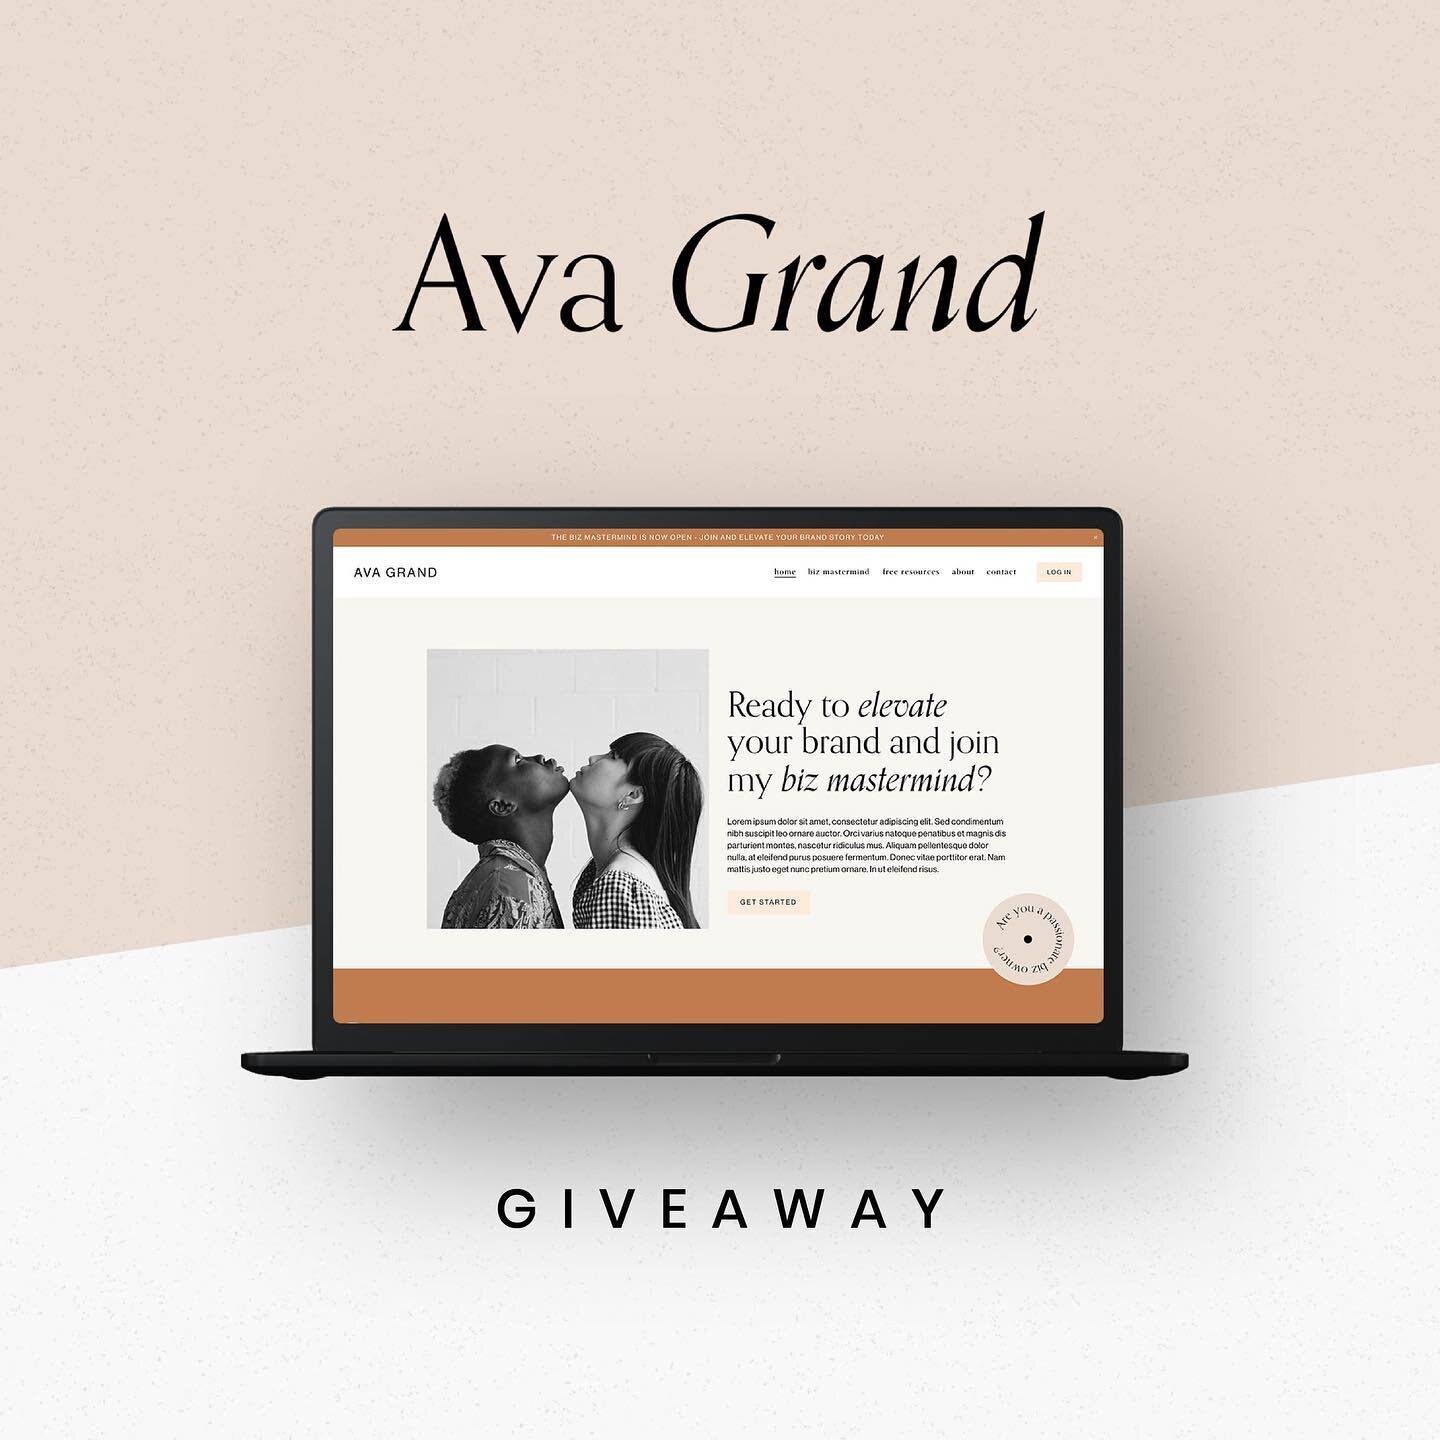 ✨ GIVEAWAY! ✨⁠⠀
&bull;⁠⠀
We&rsquo;re super excited to be giving away a copy of our newest Squarespace 7.1 Template Kit + Social Media Templates, Ava Grand 🖤⁠⠀
&bull;⁠⠀
The Ava Grand Squarespace Template Kit is a modern and sleek design. With a detai